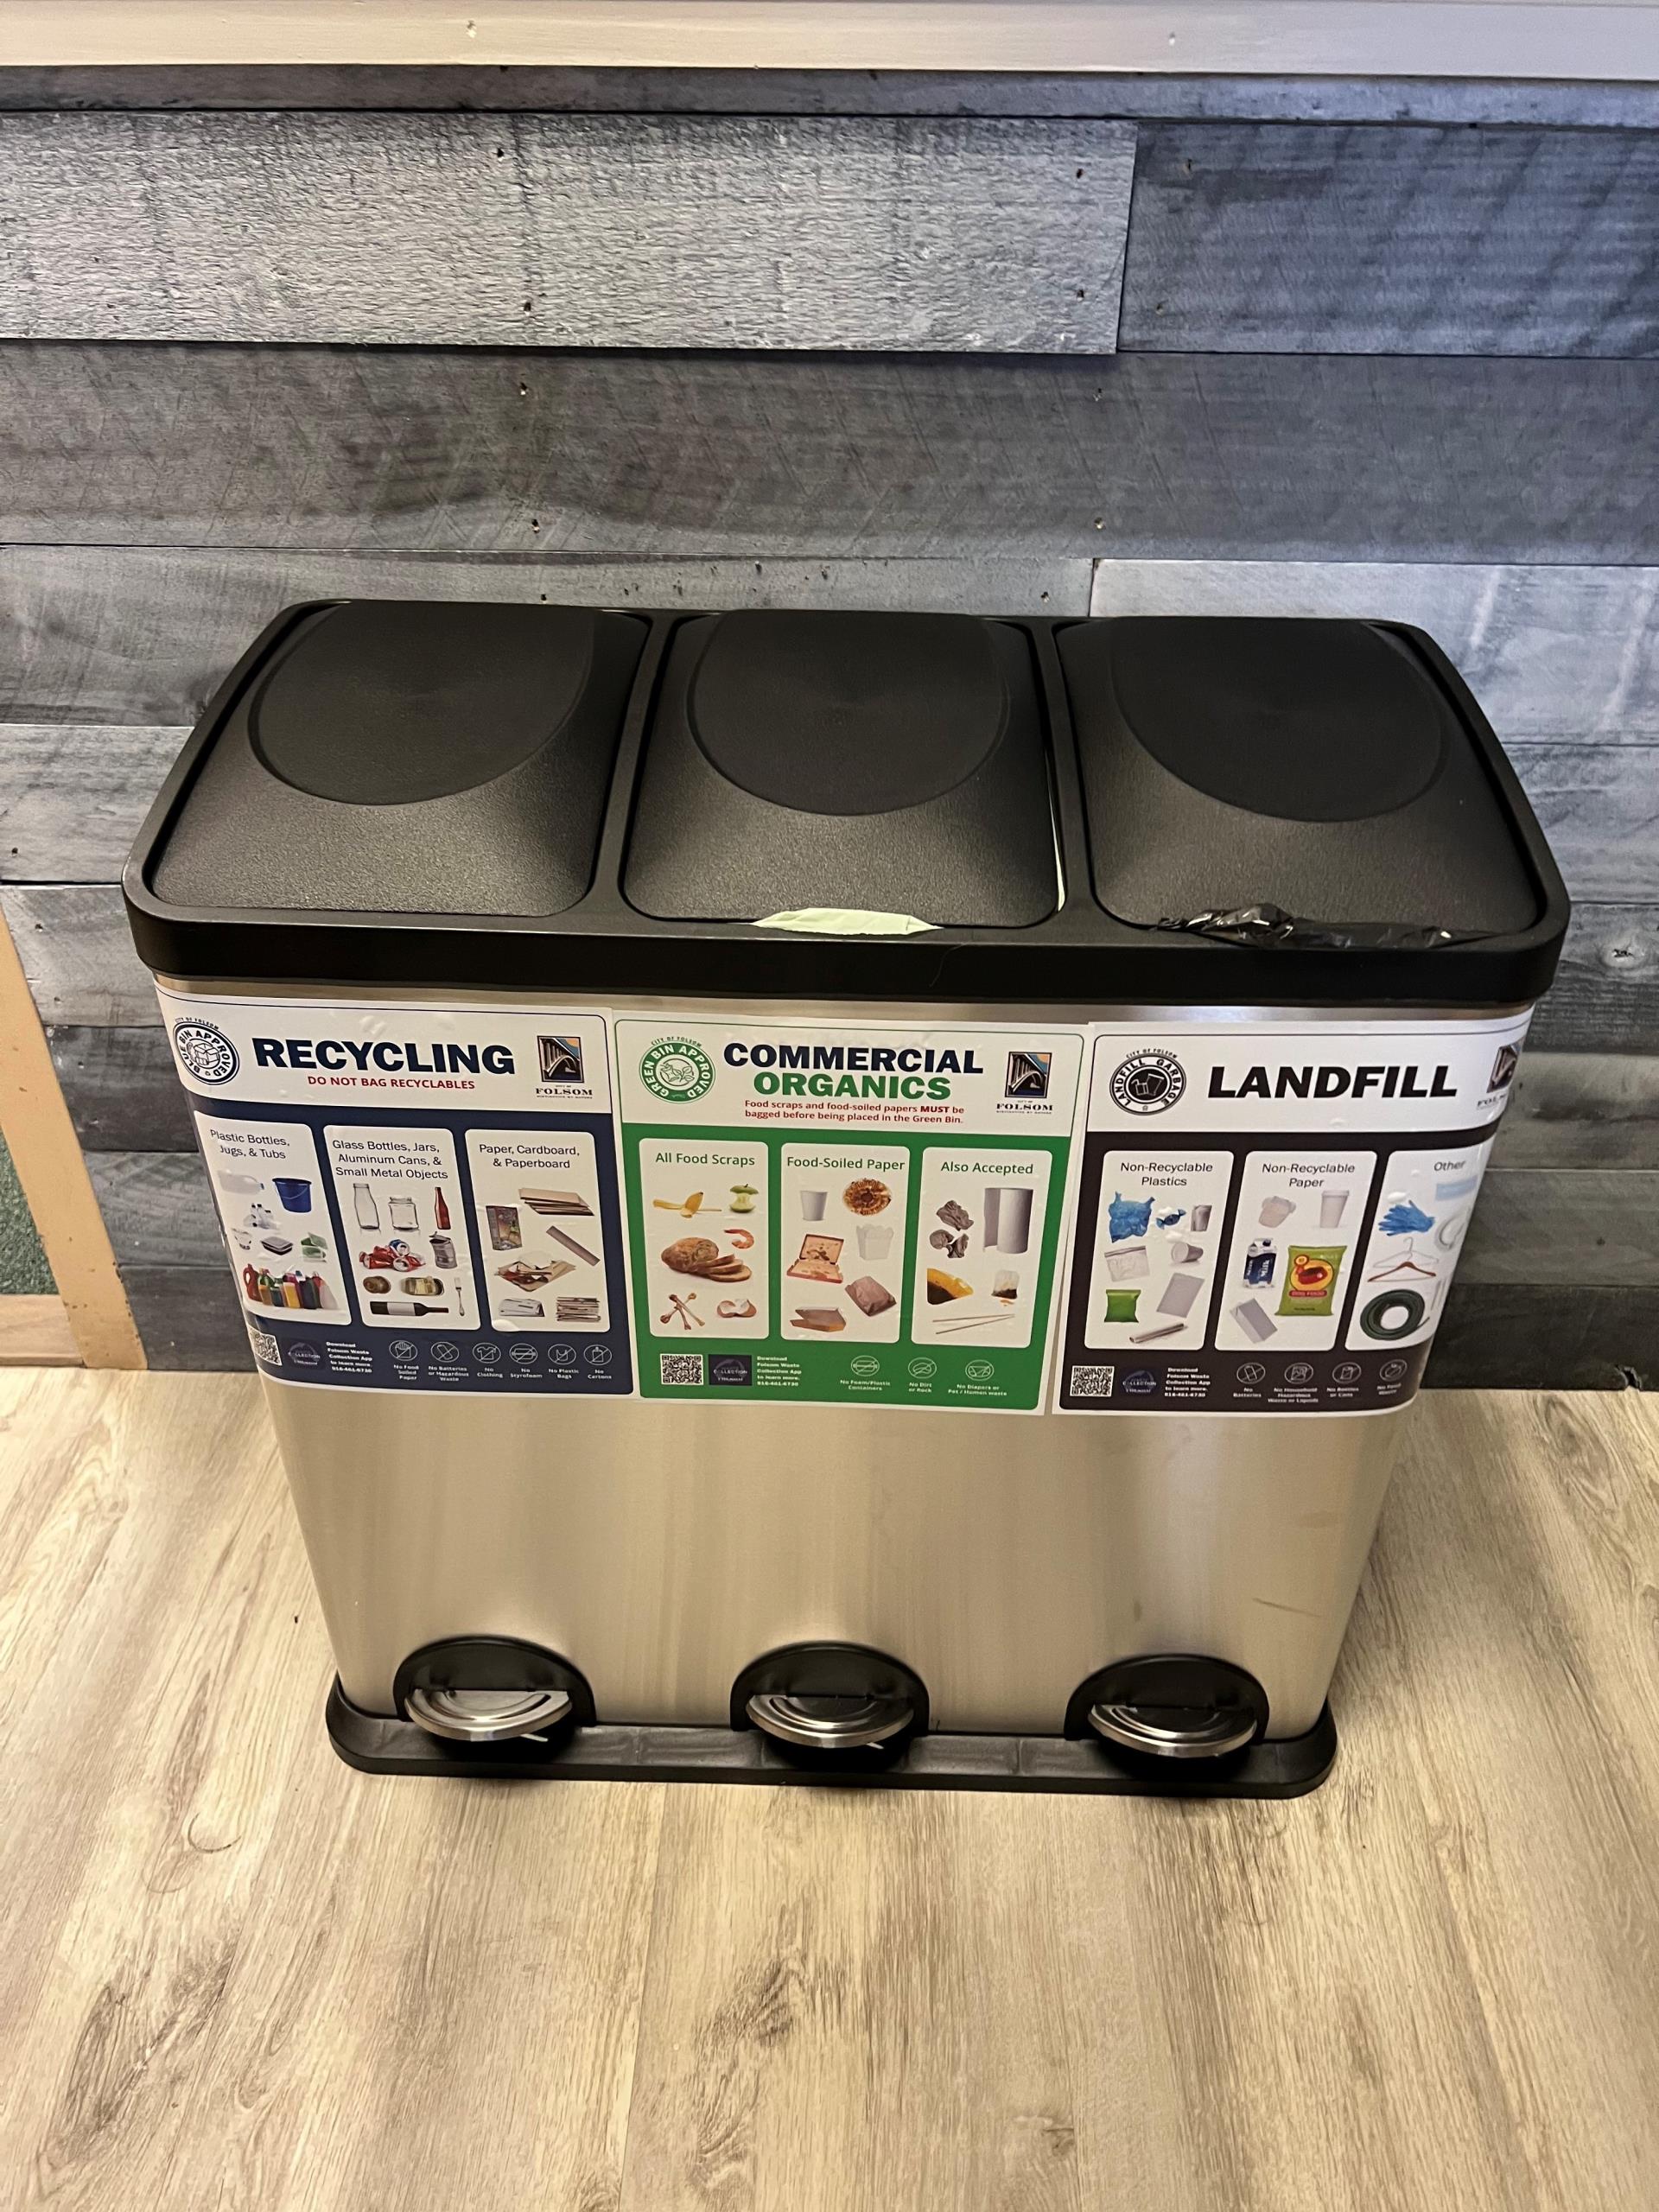 SB 1383 Separation bins for recycling, commercial organics and landfill